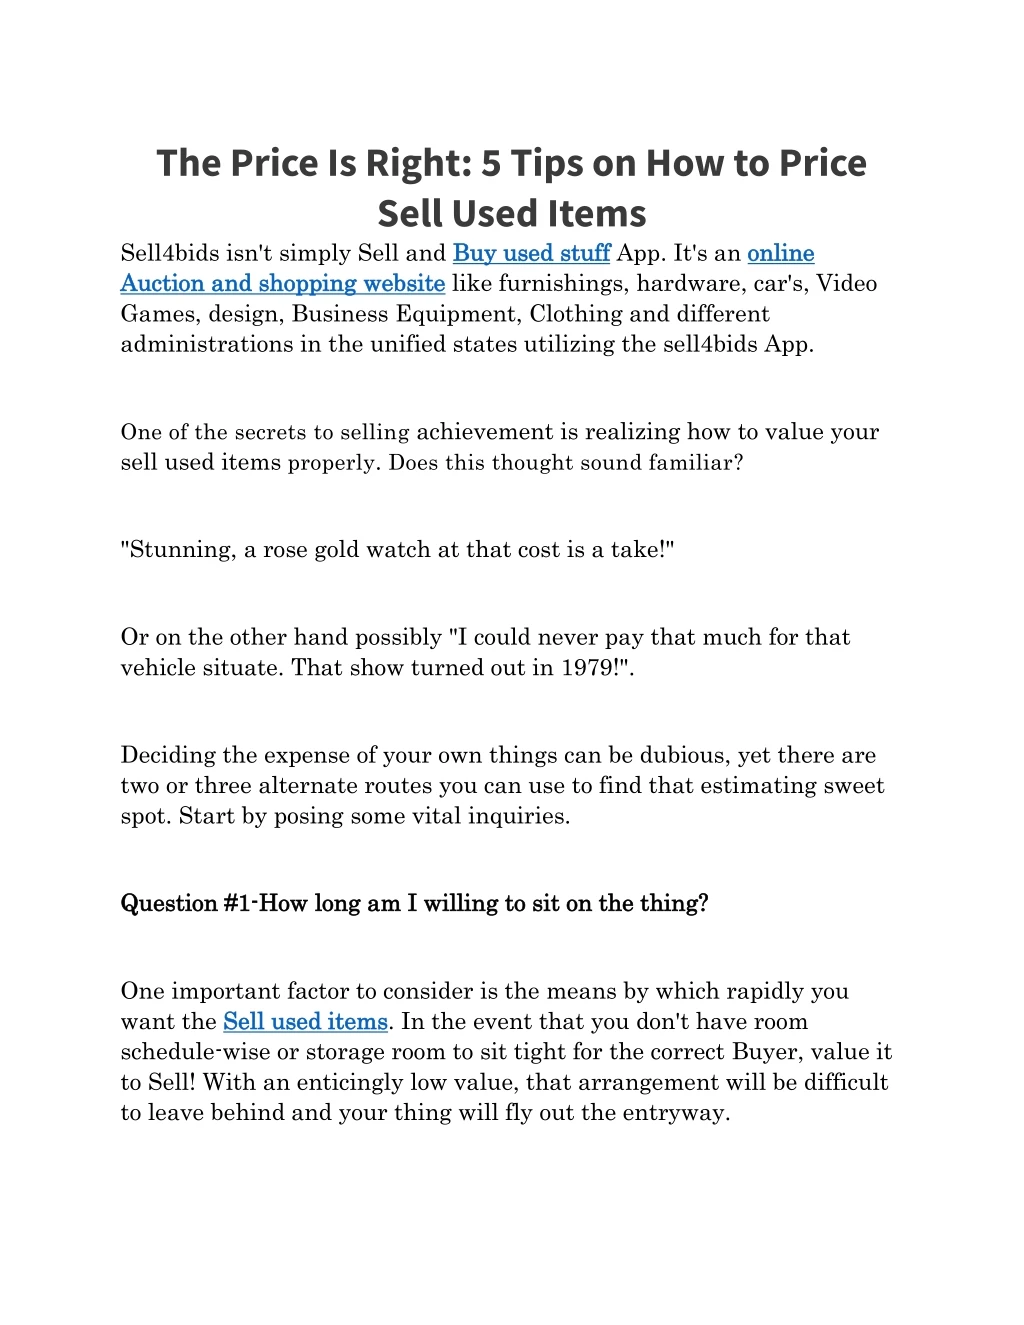 the price is right 5 tips on how to price sell